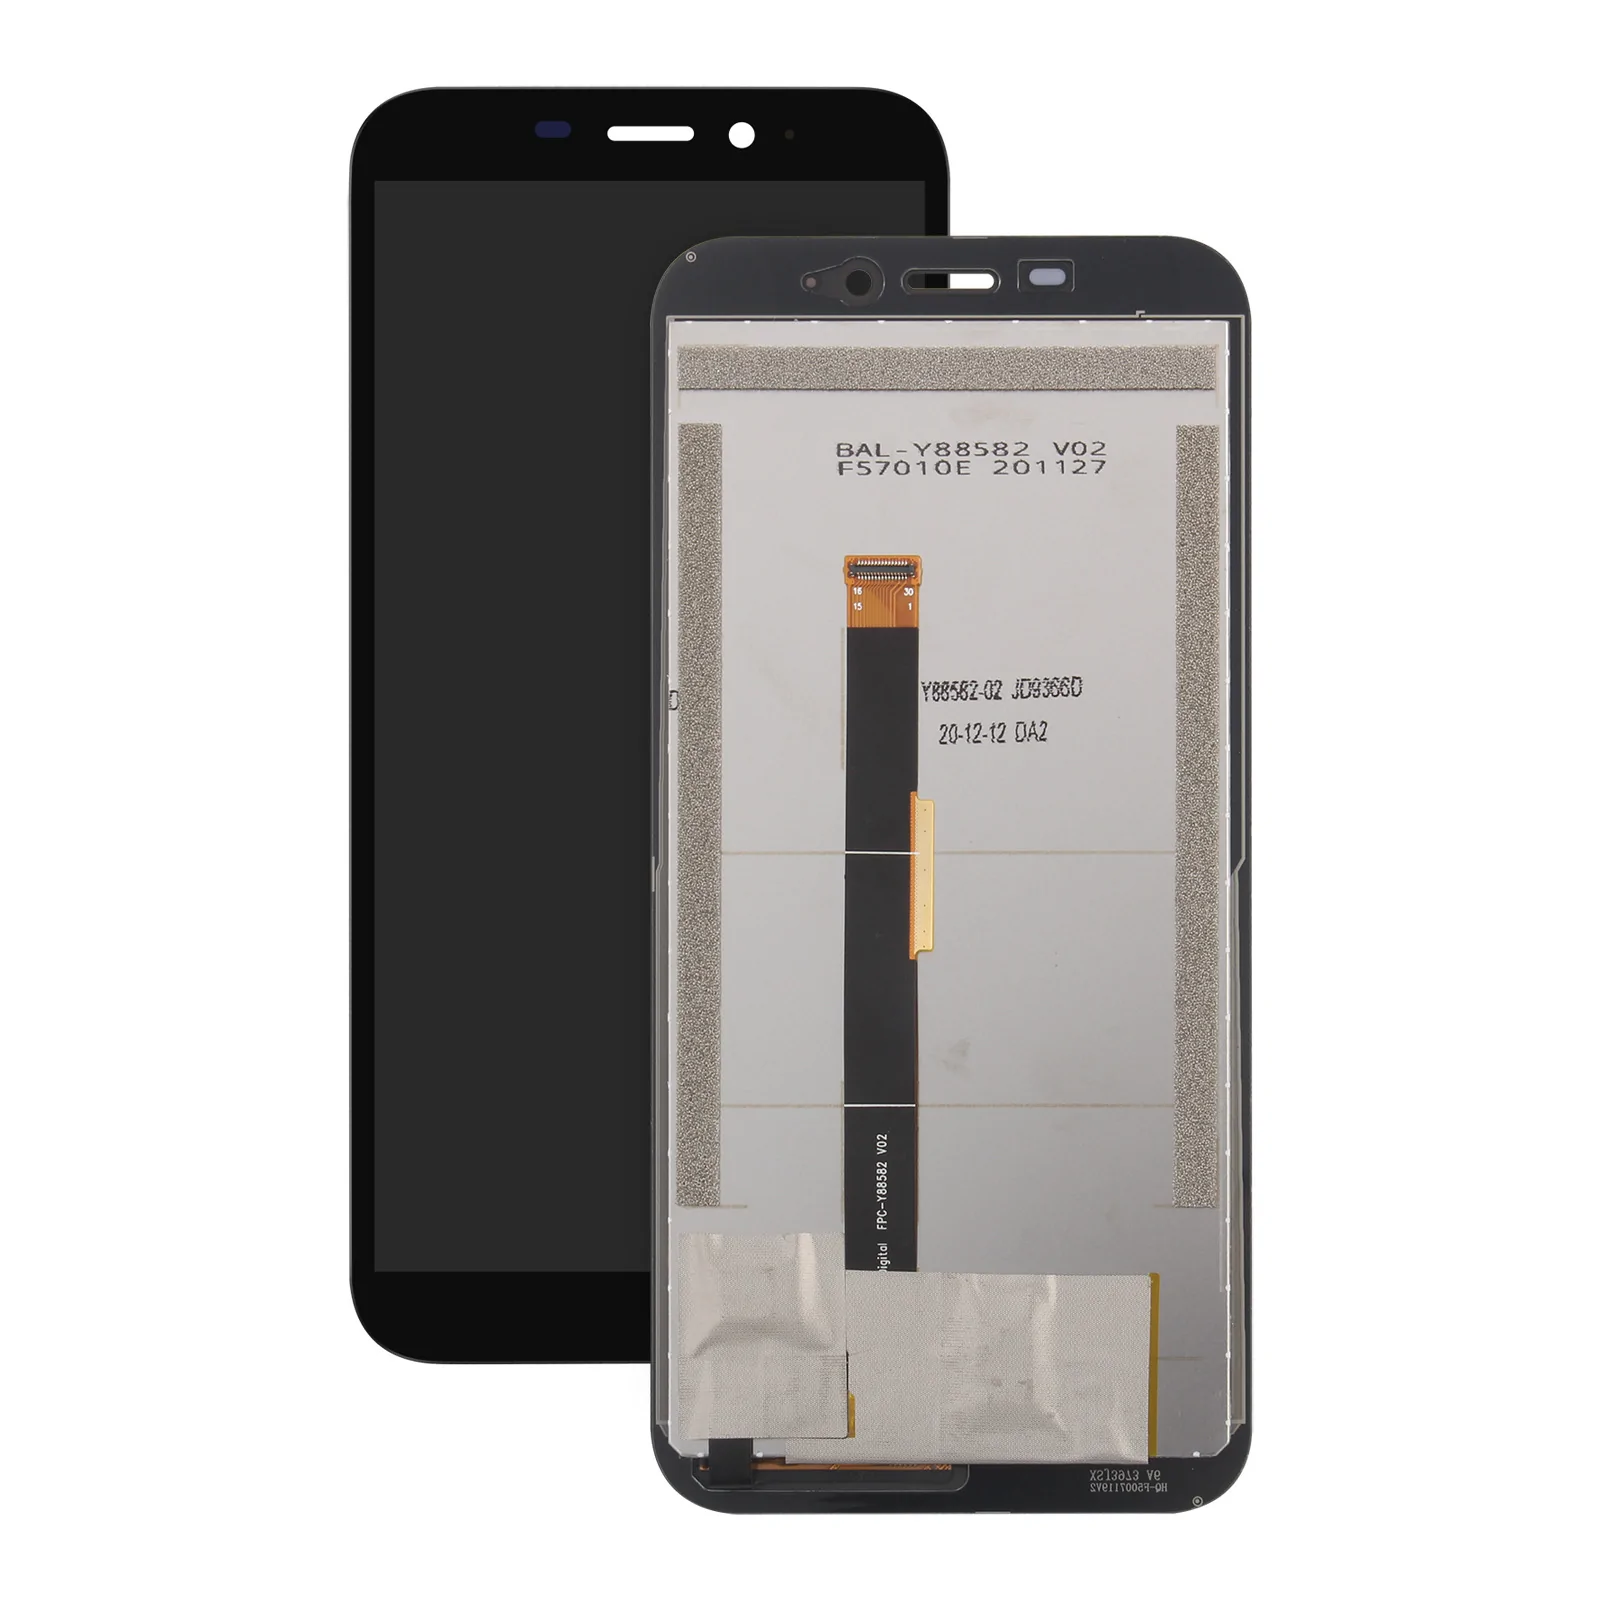 Find Bakeey for UleFone Armor X8 TFT Display Touch Screen Digitizer Assembly Replacement Parts with Tools for Sale on Gipsybee.com